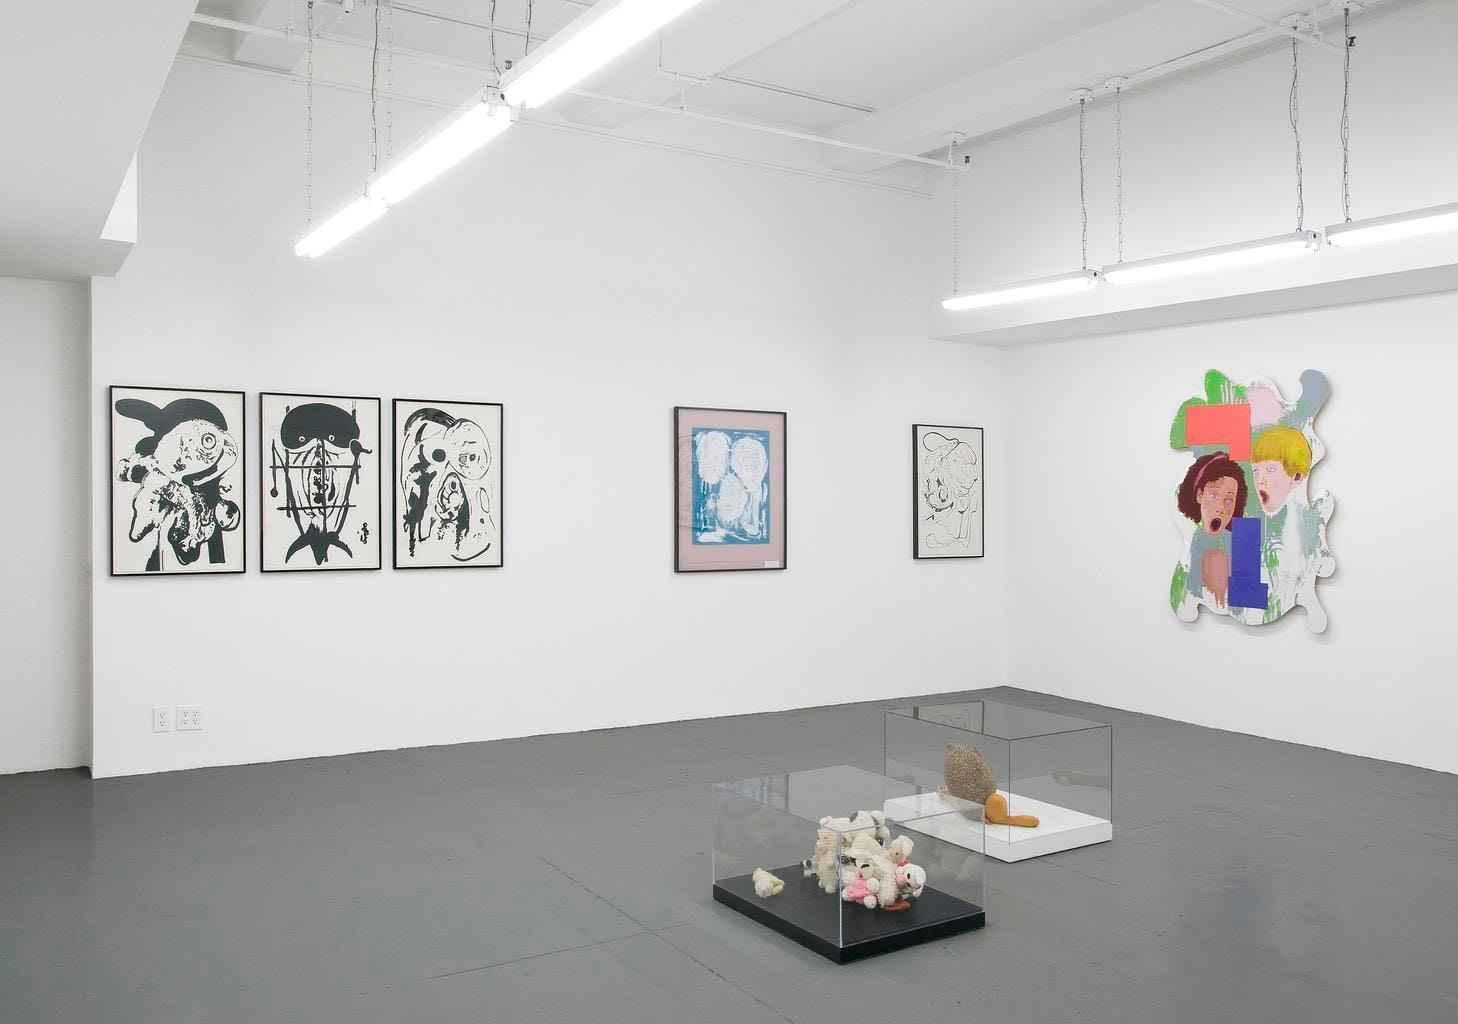  Installation view,&nbsp;Mike Kelly, Selected Works 1990-1995, Marc Jancou, New York, October 3 - November 9, 2013.